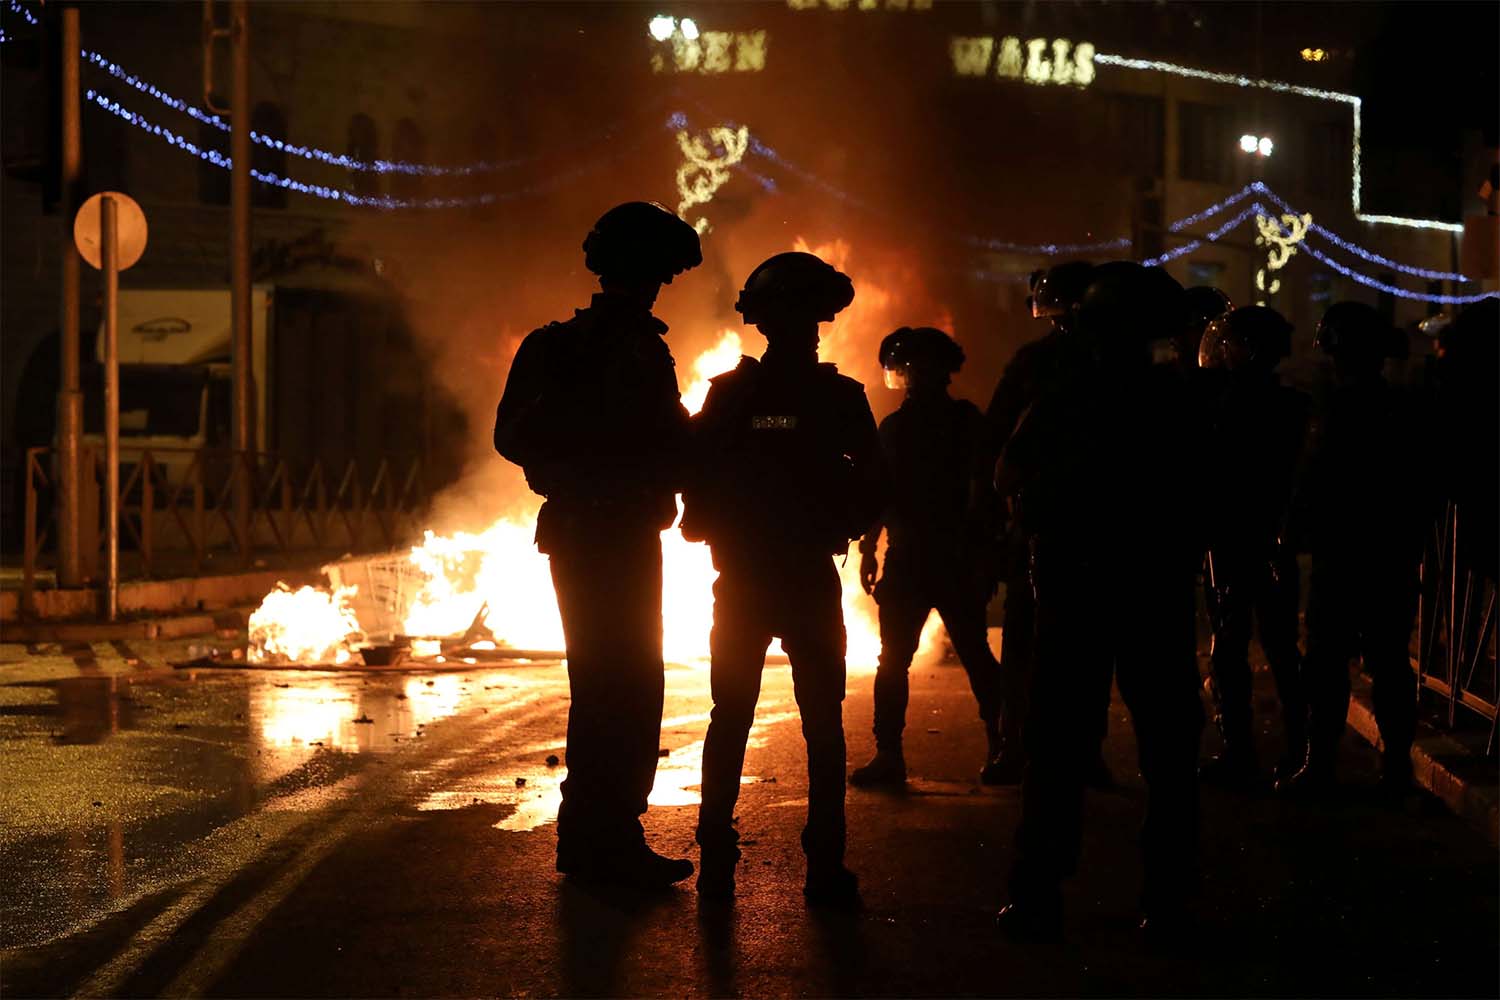 The Palestinian clashes with Israeli police began with the start of Ramadan